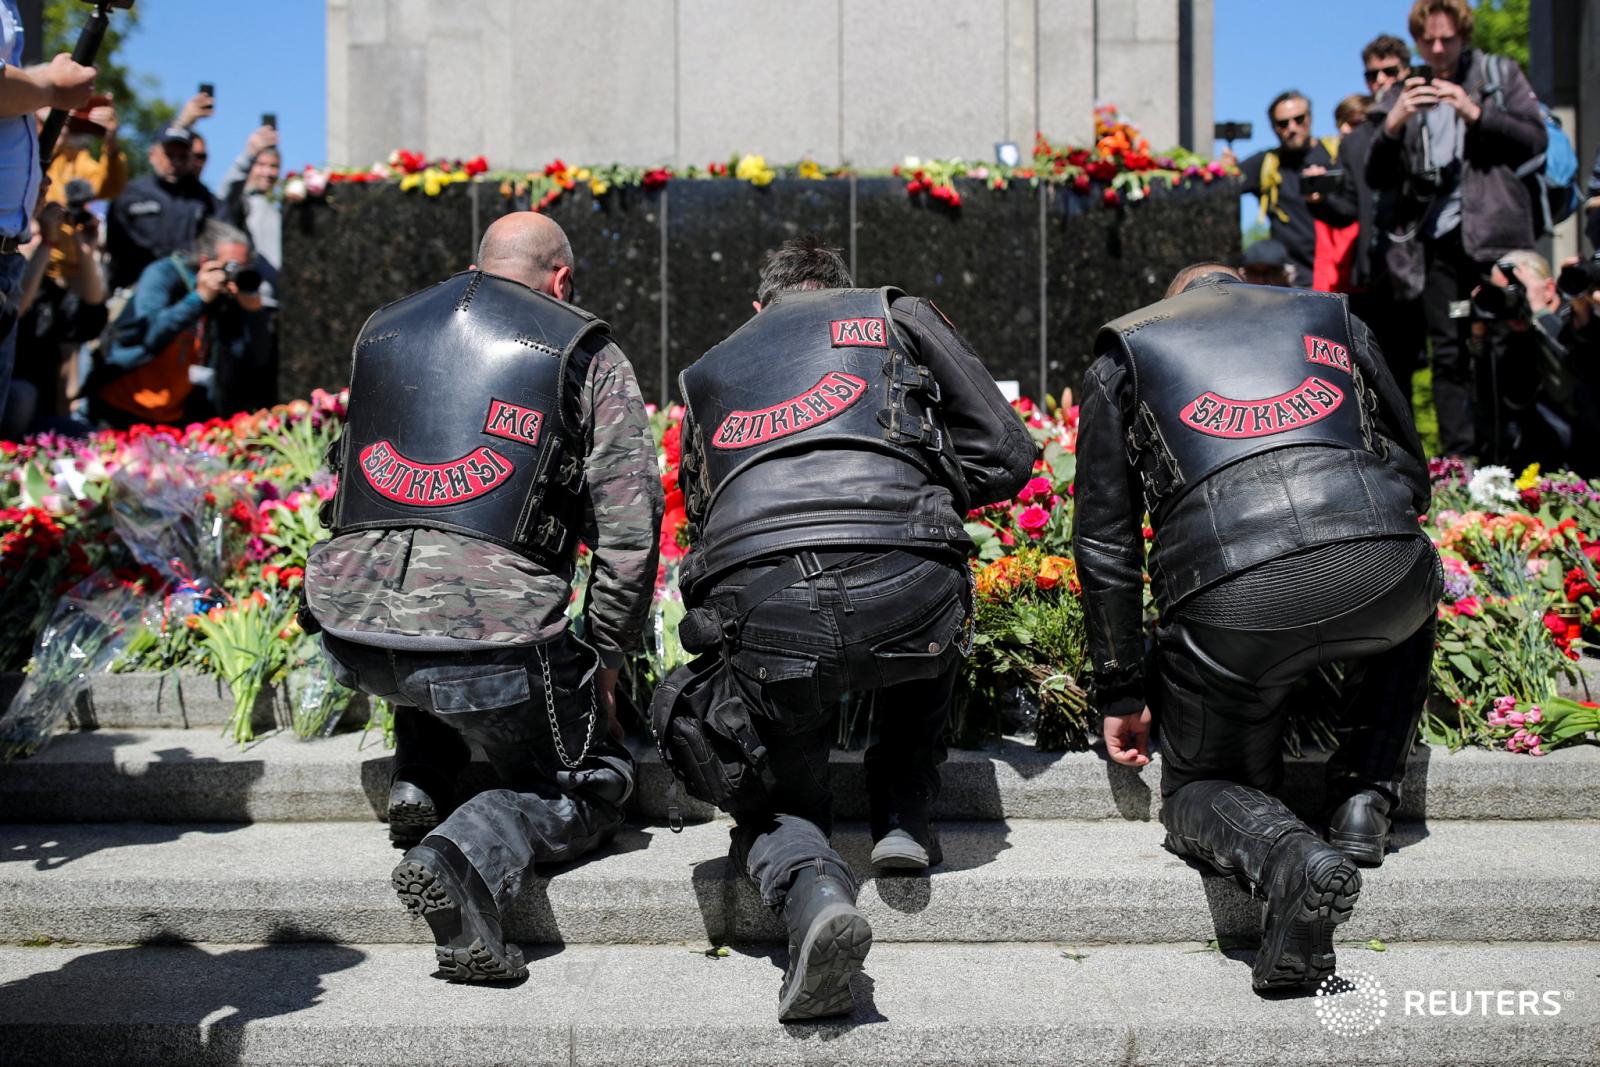 WW2-ANNIVERSARY for REUTERS - Members of the motorcycling club 